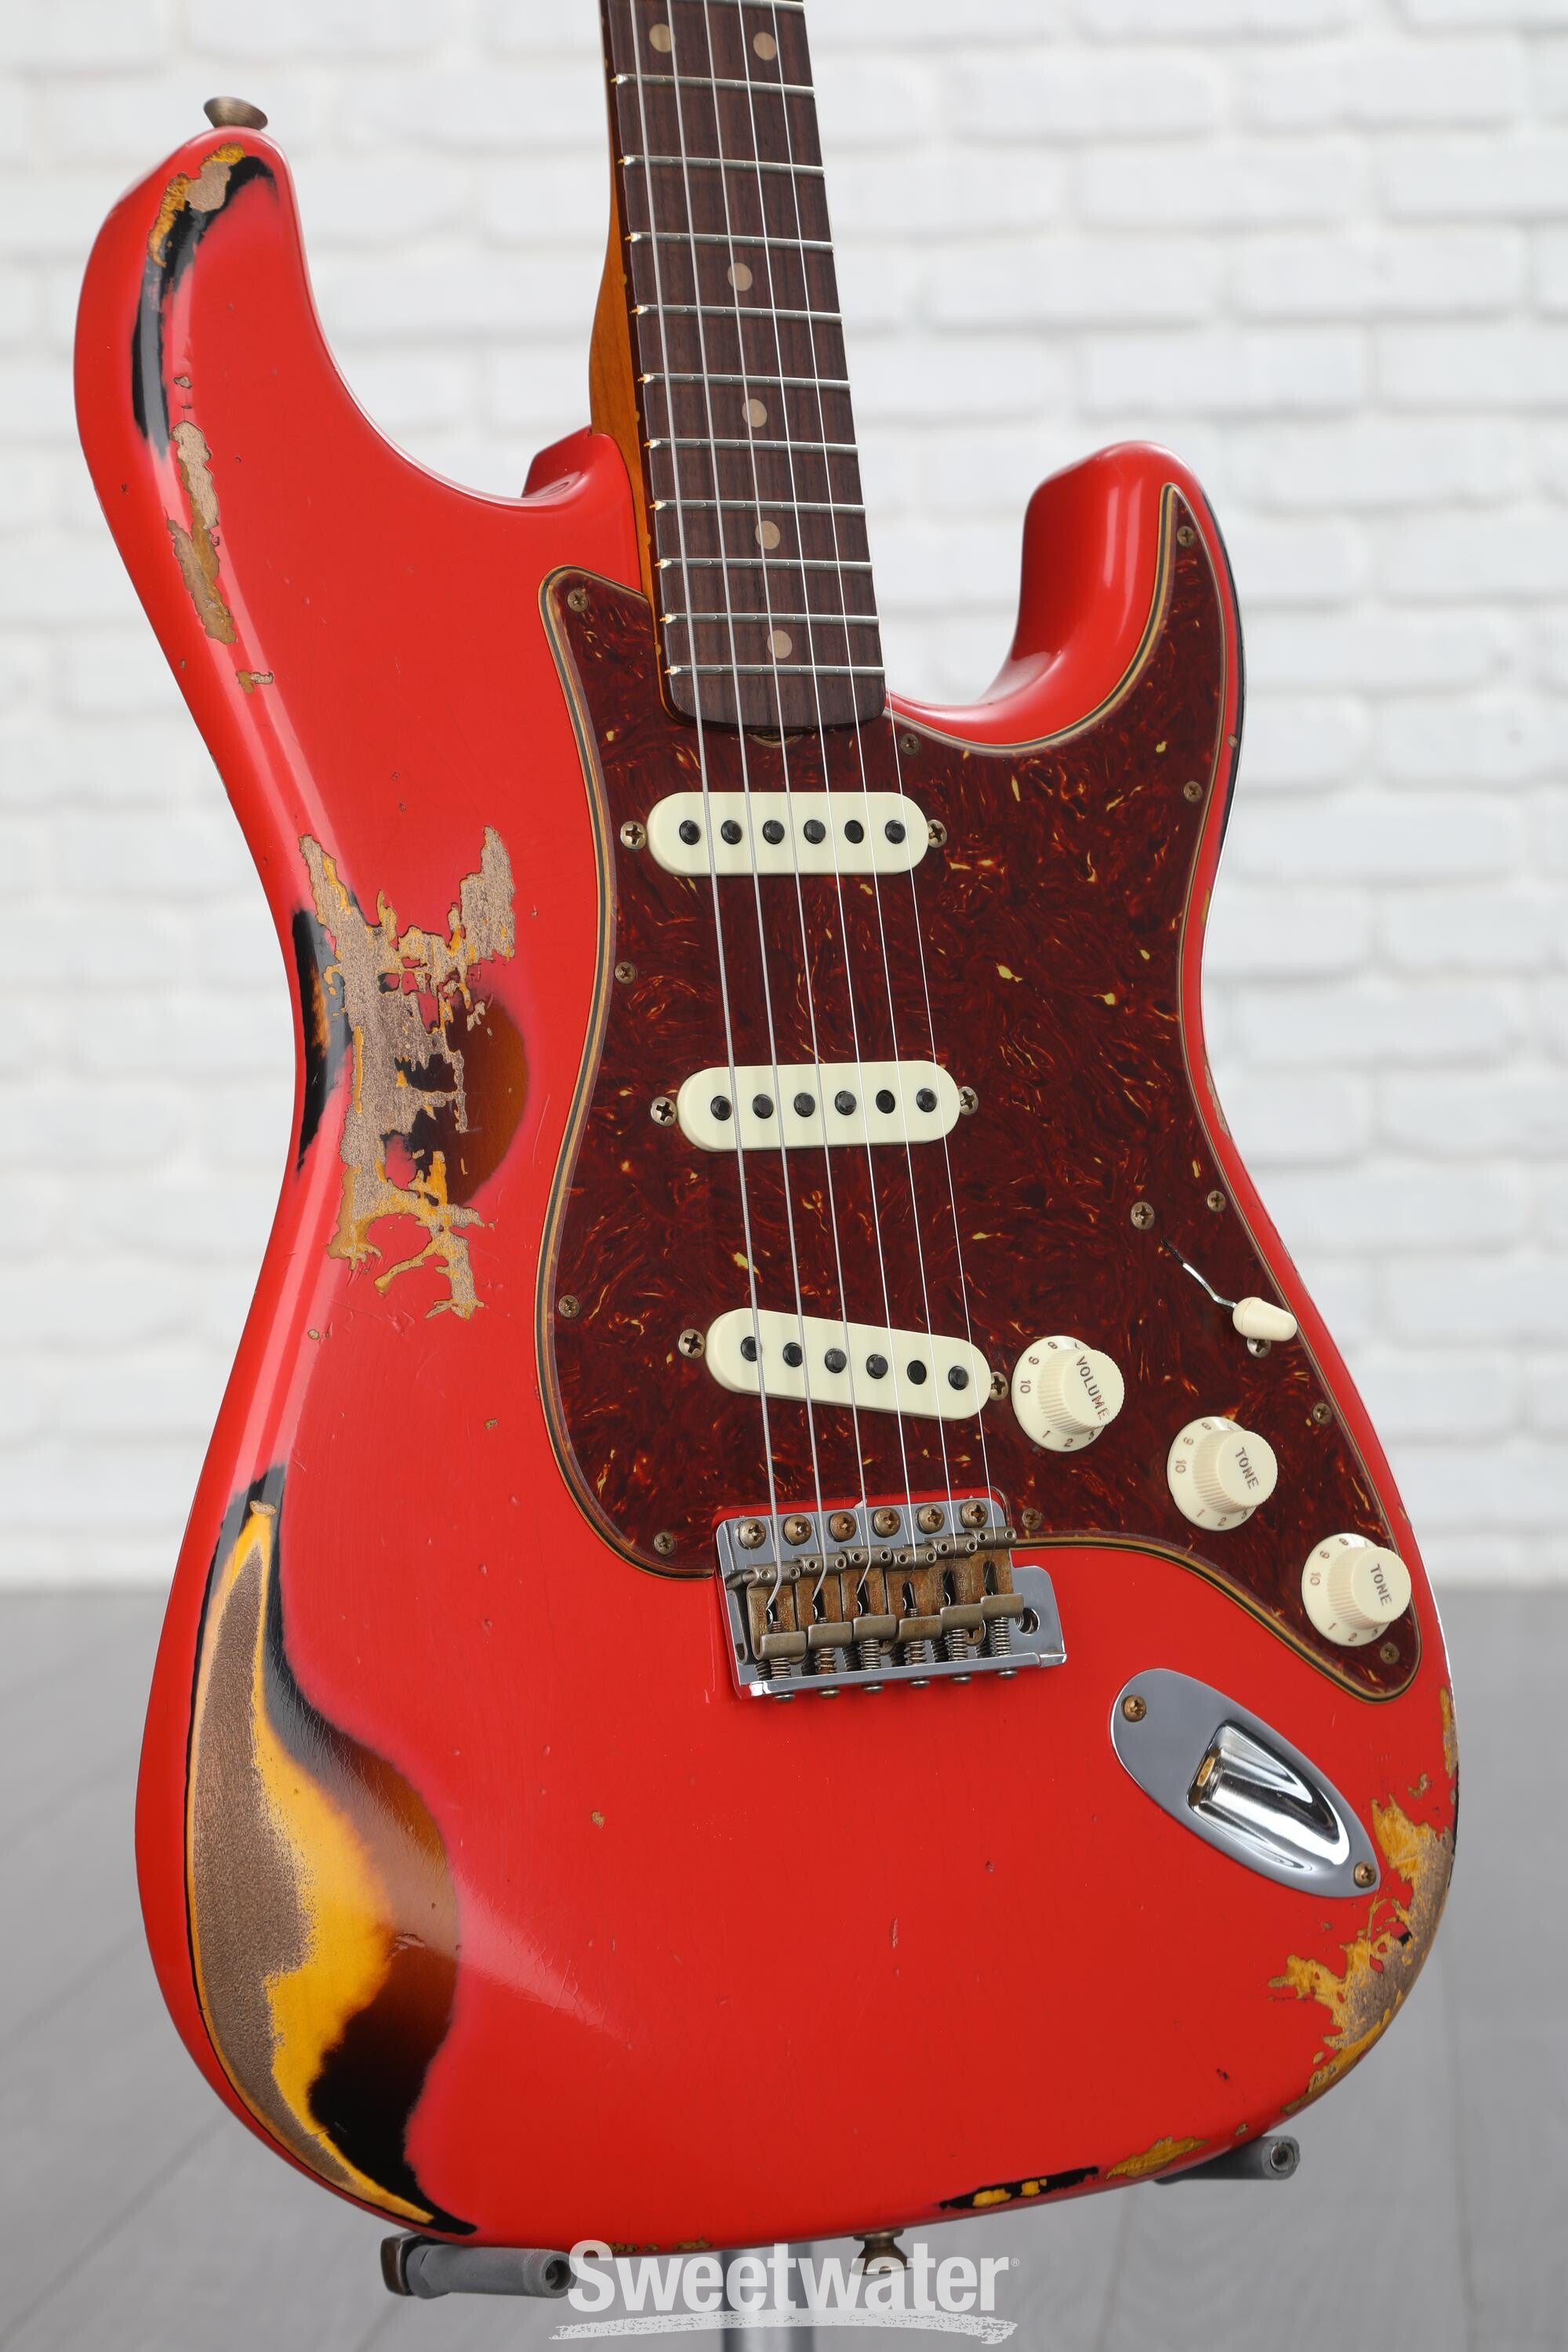 Limited Edition '61 Stratocaster Heavy Relic - Aged Fiesta Red